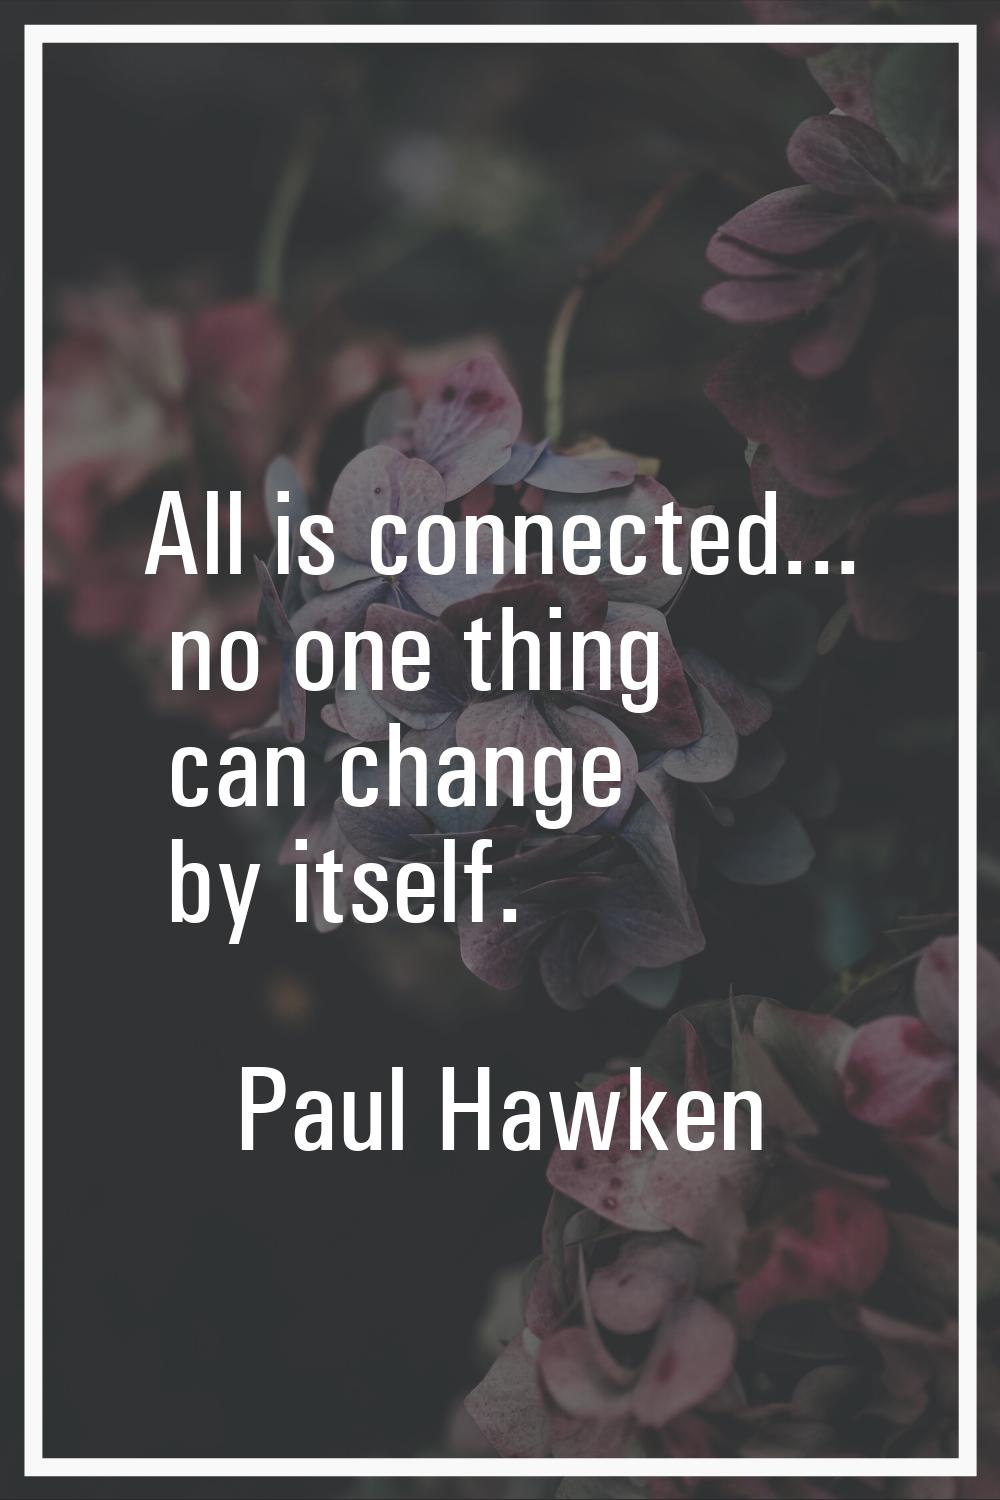 All is connected... no one thing can change by itself.